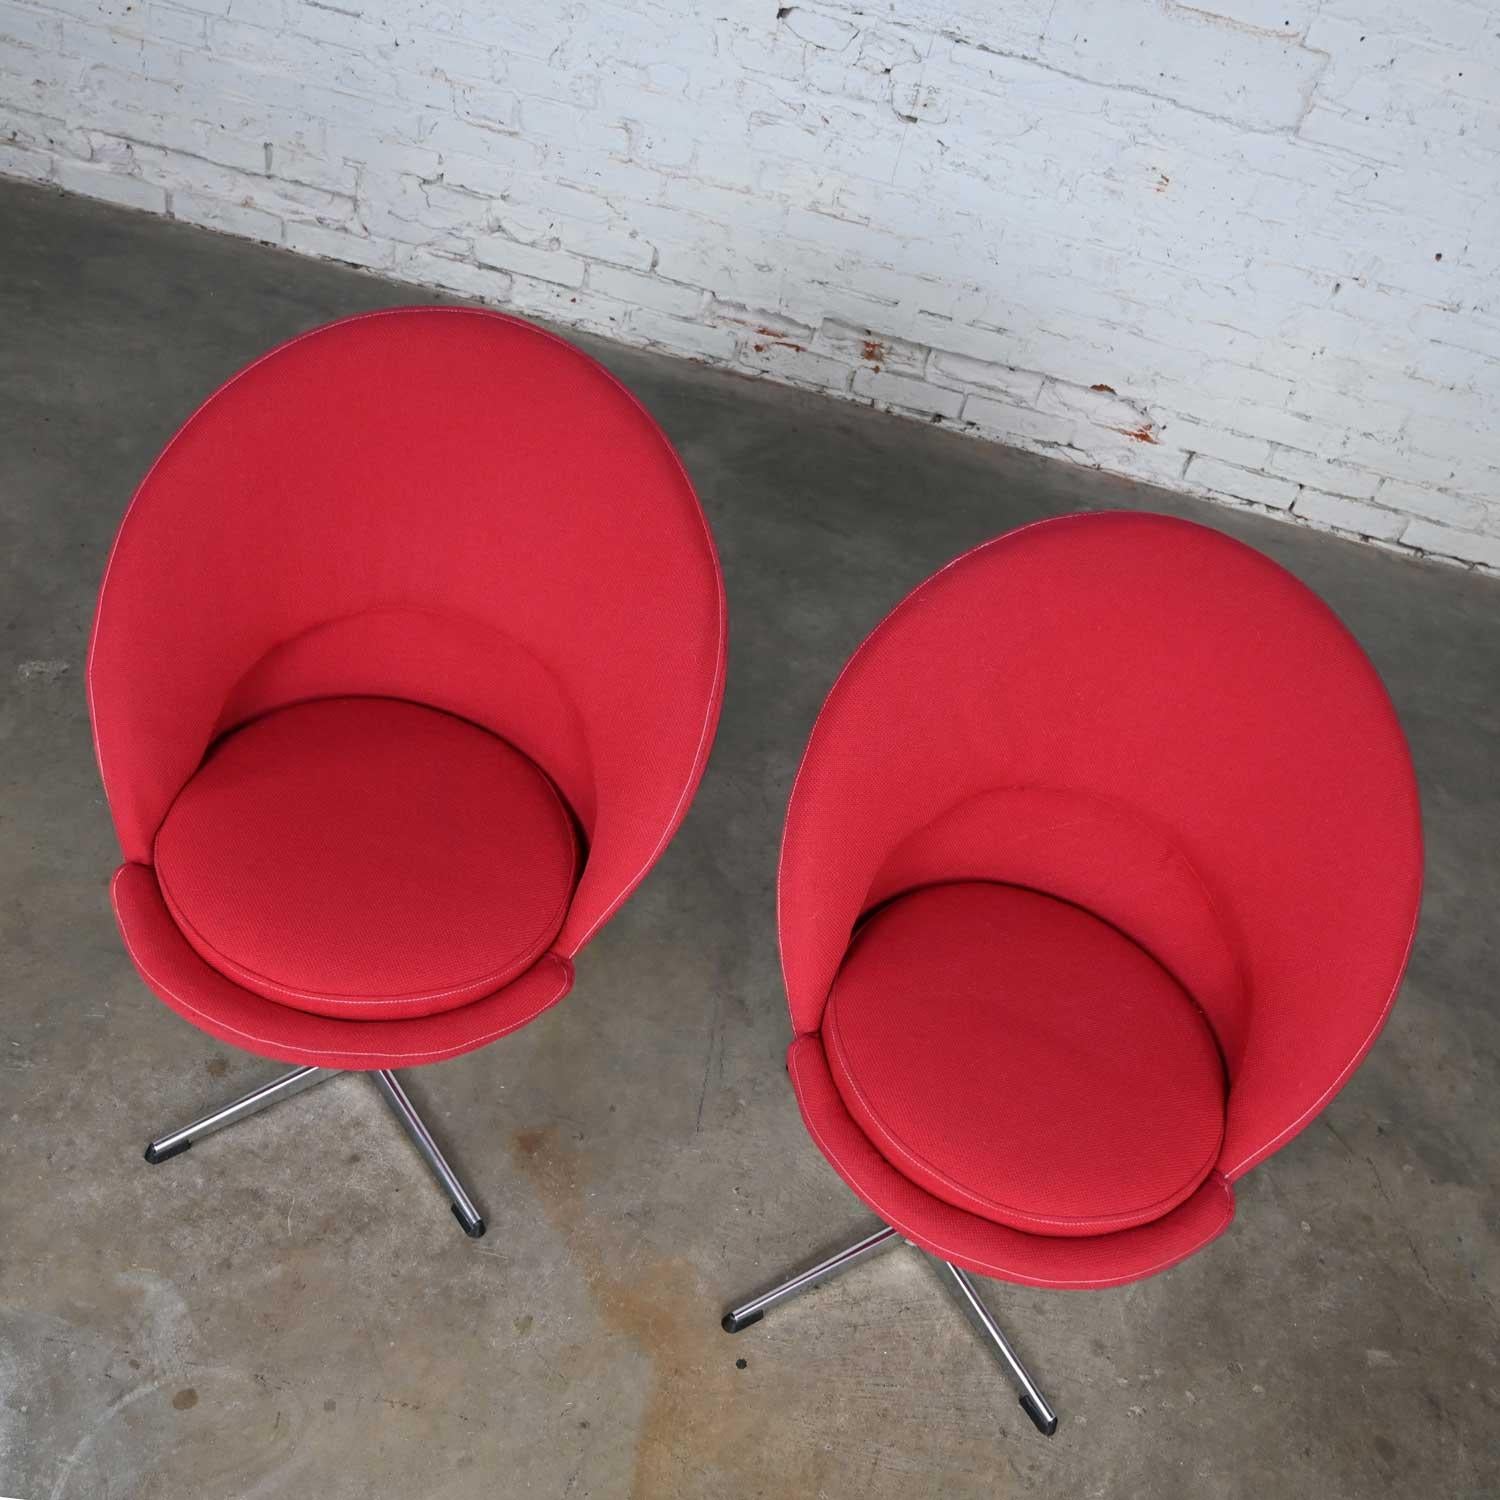 Pair Vintage Mid-Century Modern Red Cone Chairs Verner Panton for Fritz Hansen In Good Condition For Sale In Topeka, KS